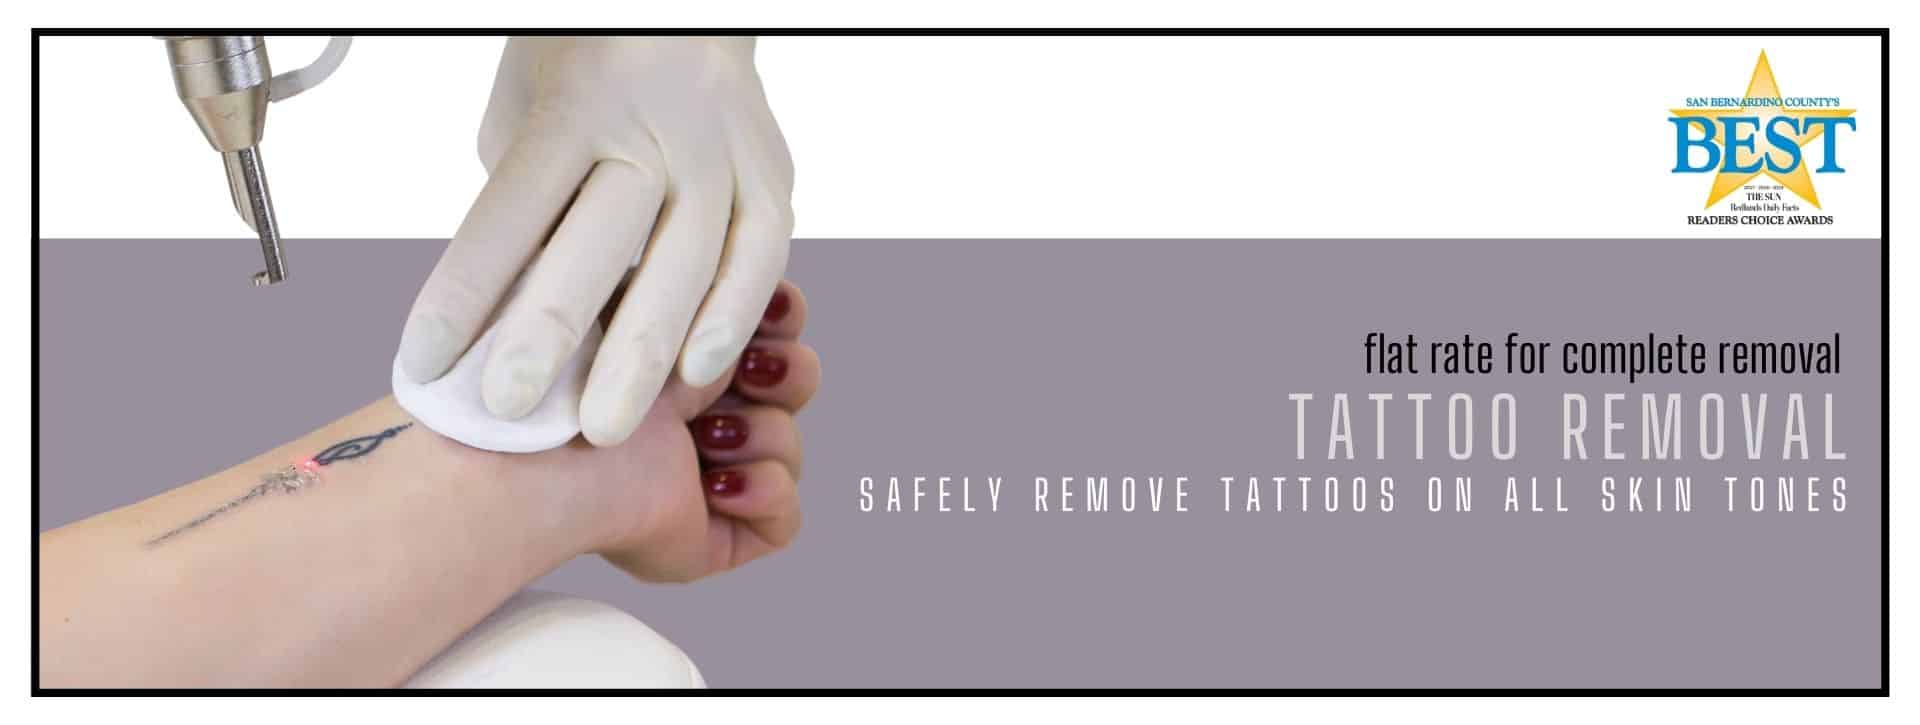 Patient receiving Laser Tattoo Removal.